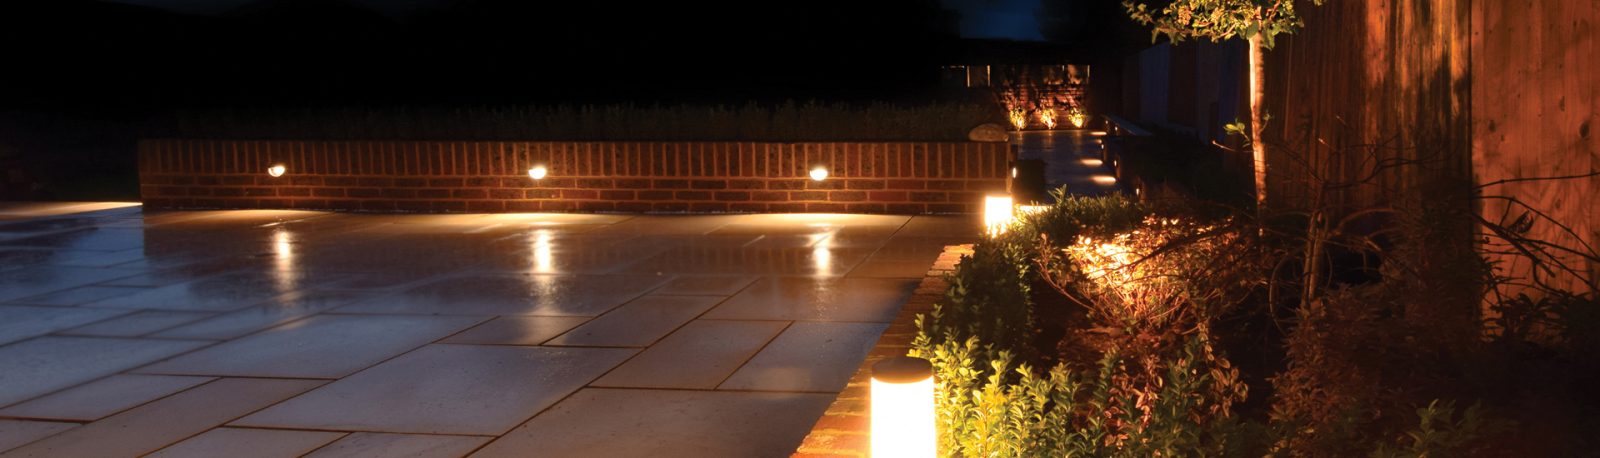 Elluminate lights casting a glow across some pavers in garden at night